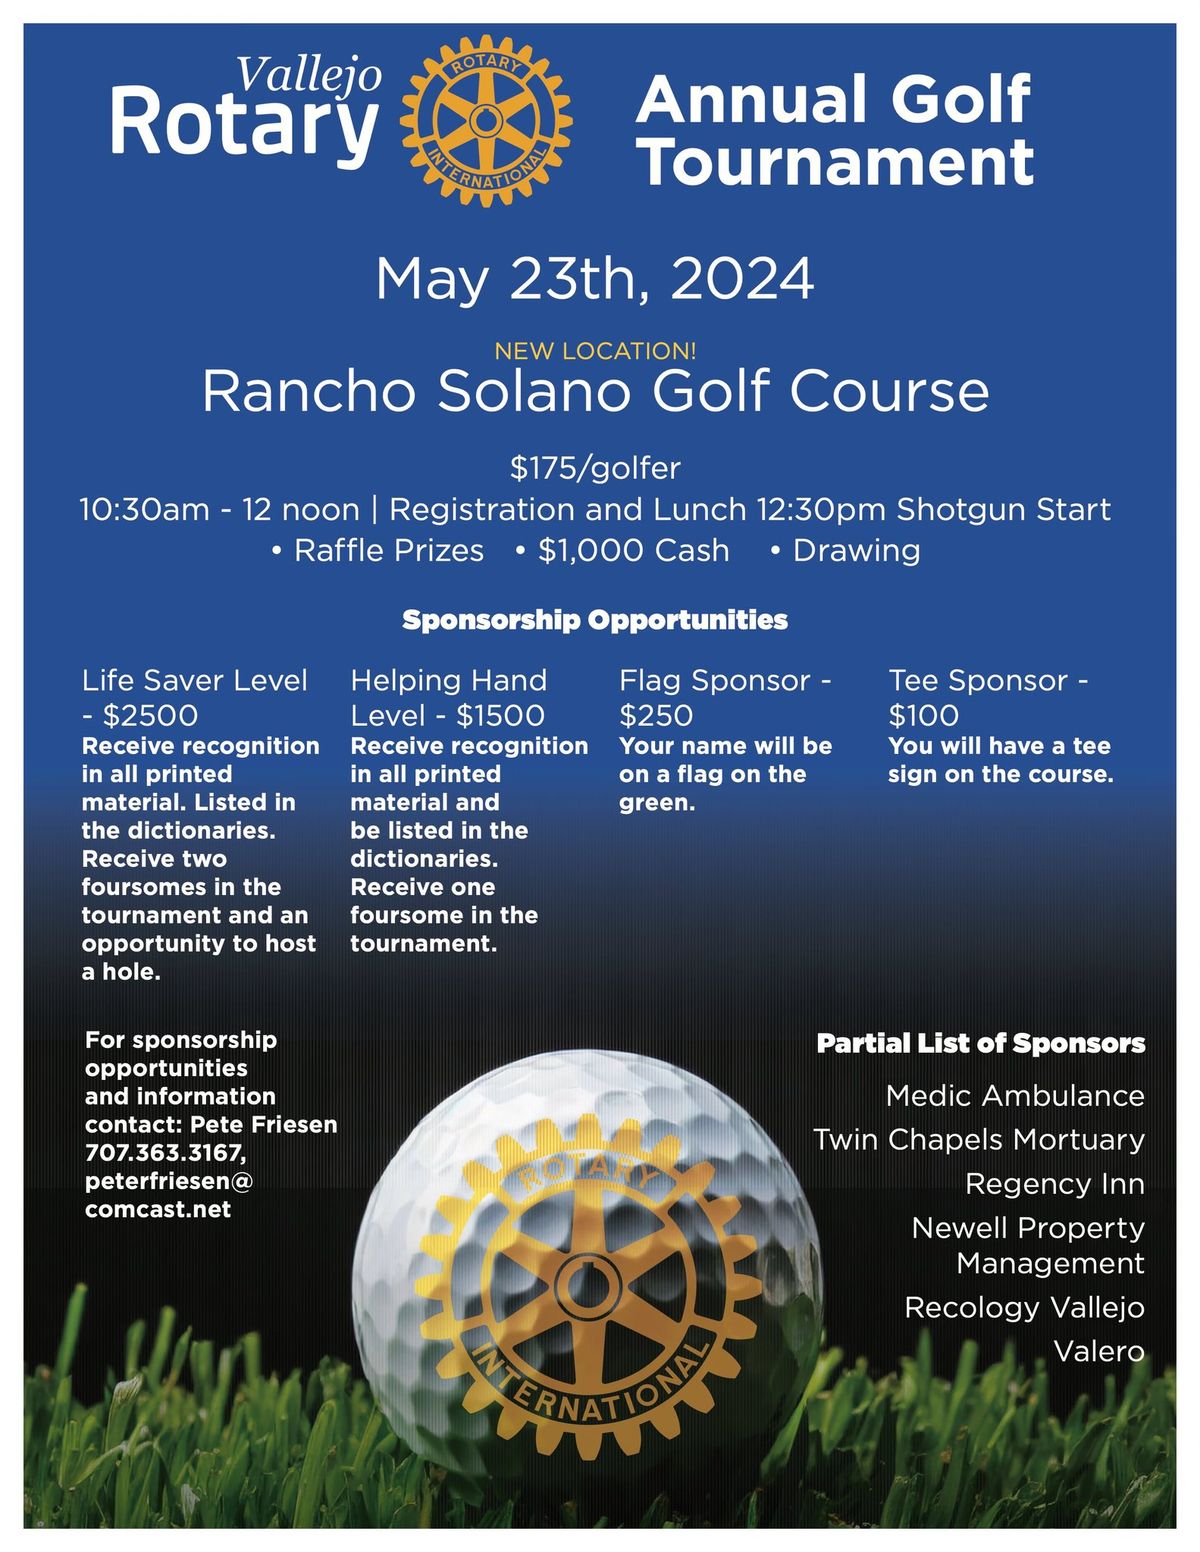 Vallejo Rotary Annual Golf Tournament